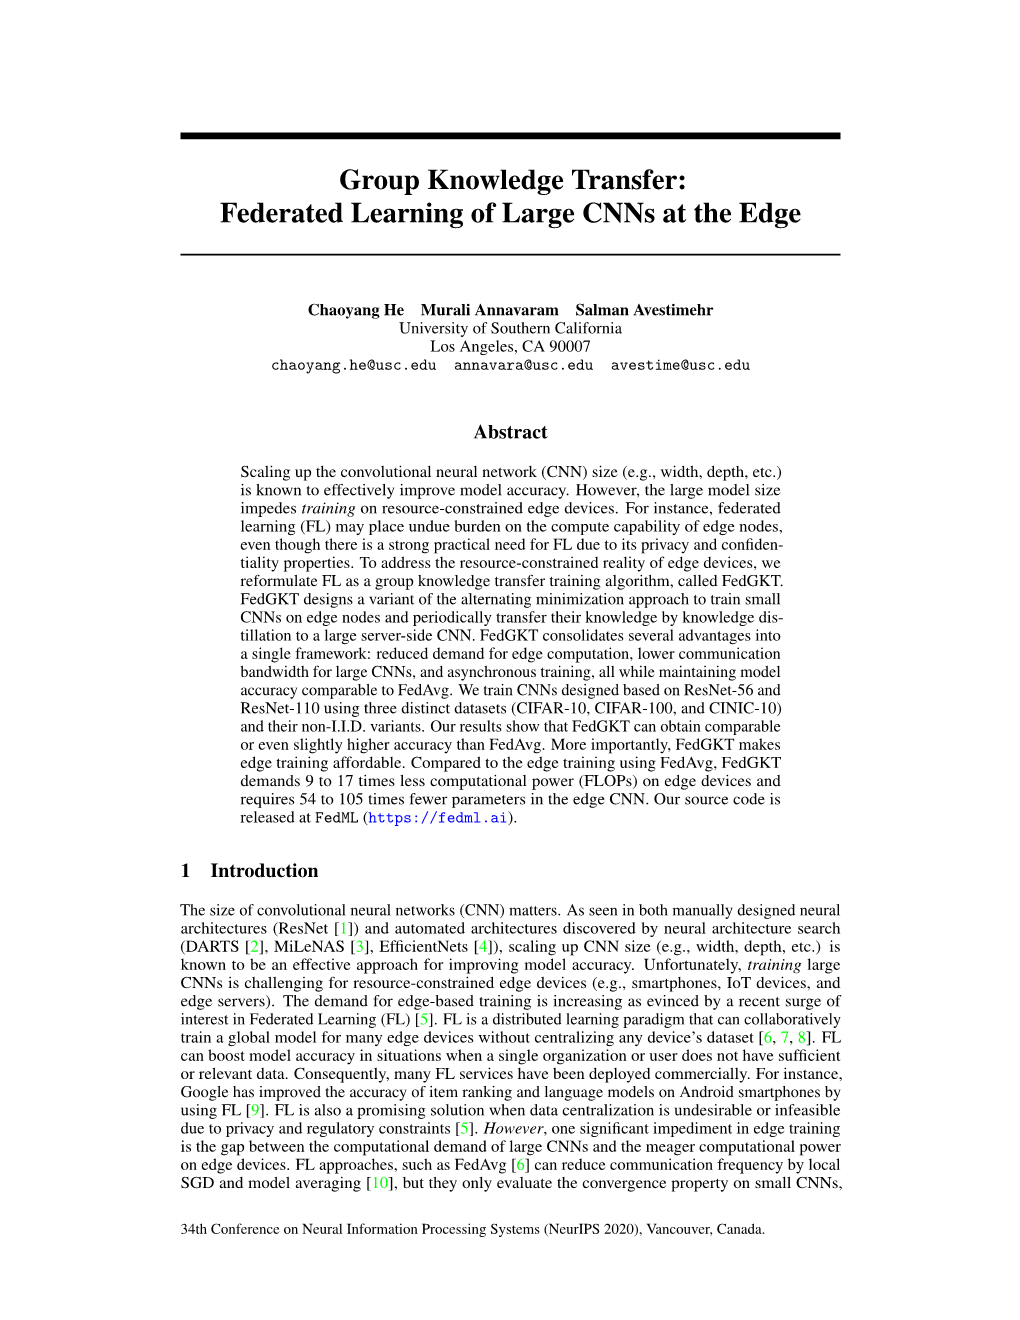 Group Knowledge Transfer: Federated Learning of Large Cnns at the Edge